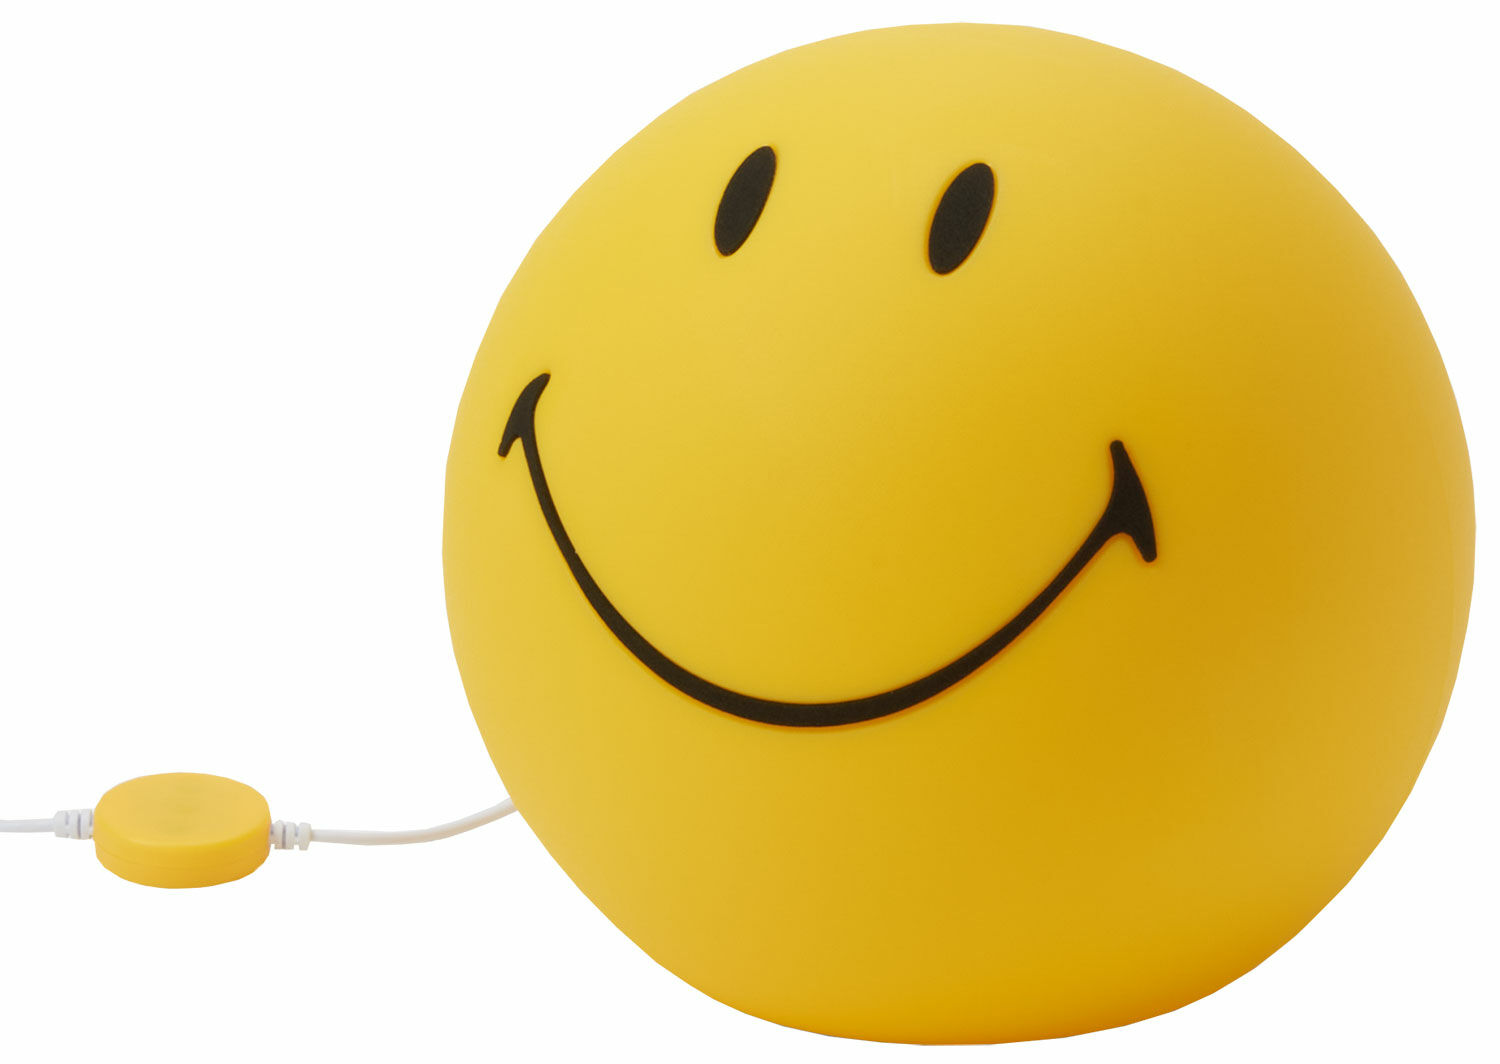 Lampe LED "Smiley®", petite version, dimmable incl. mode nuit von Mr. Maria